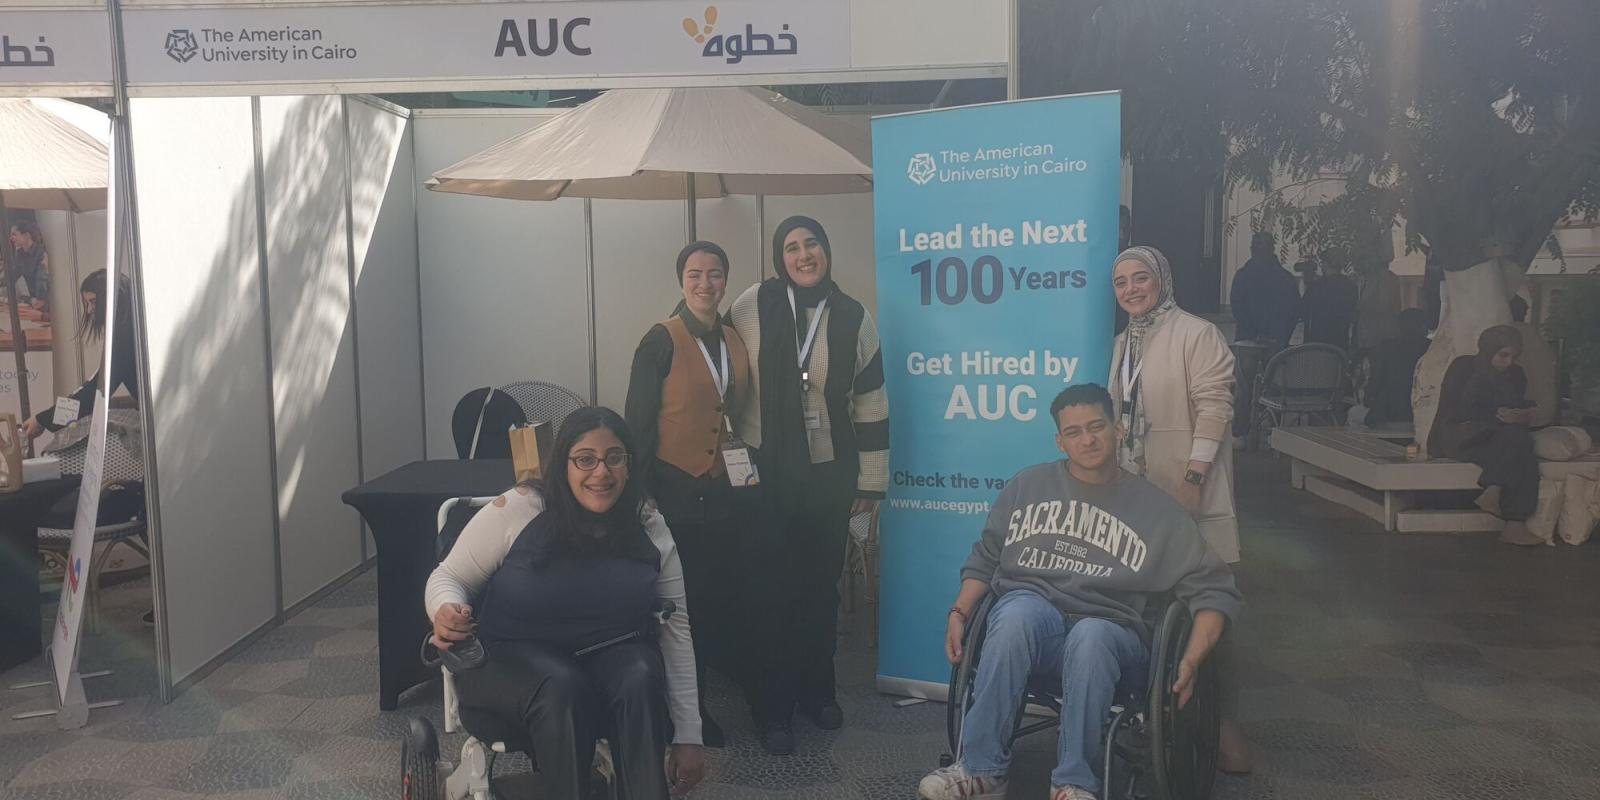 AUC HR team standing at booth, participating in Helm fair 